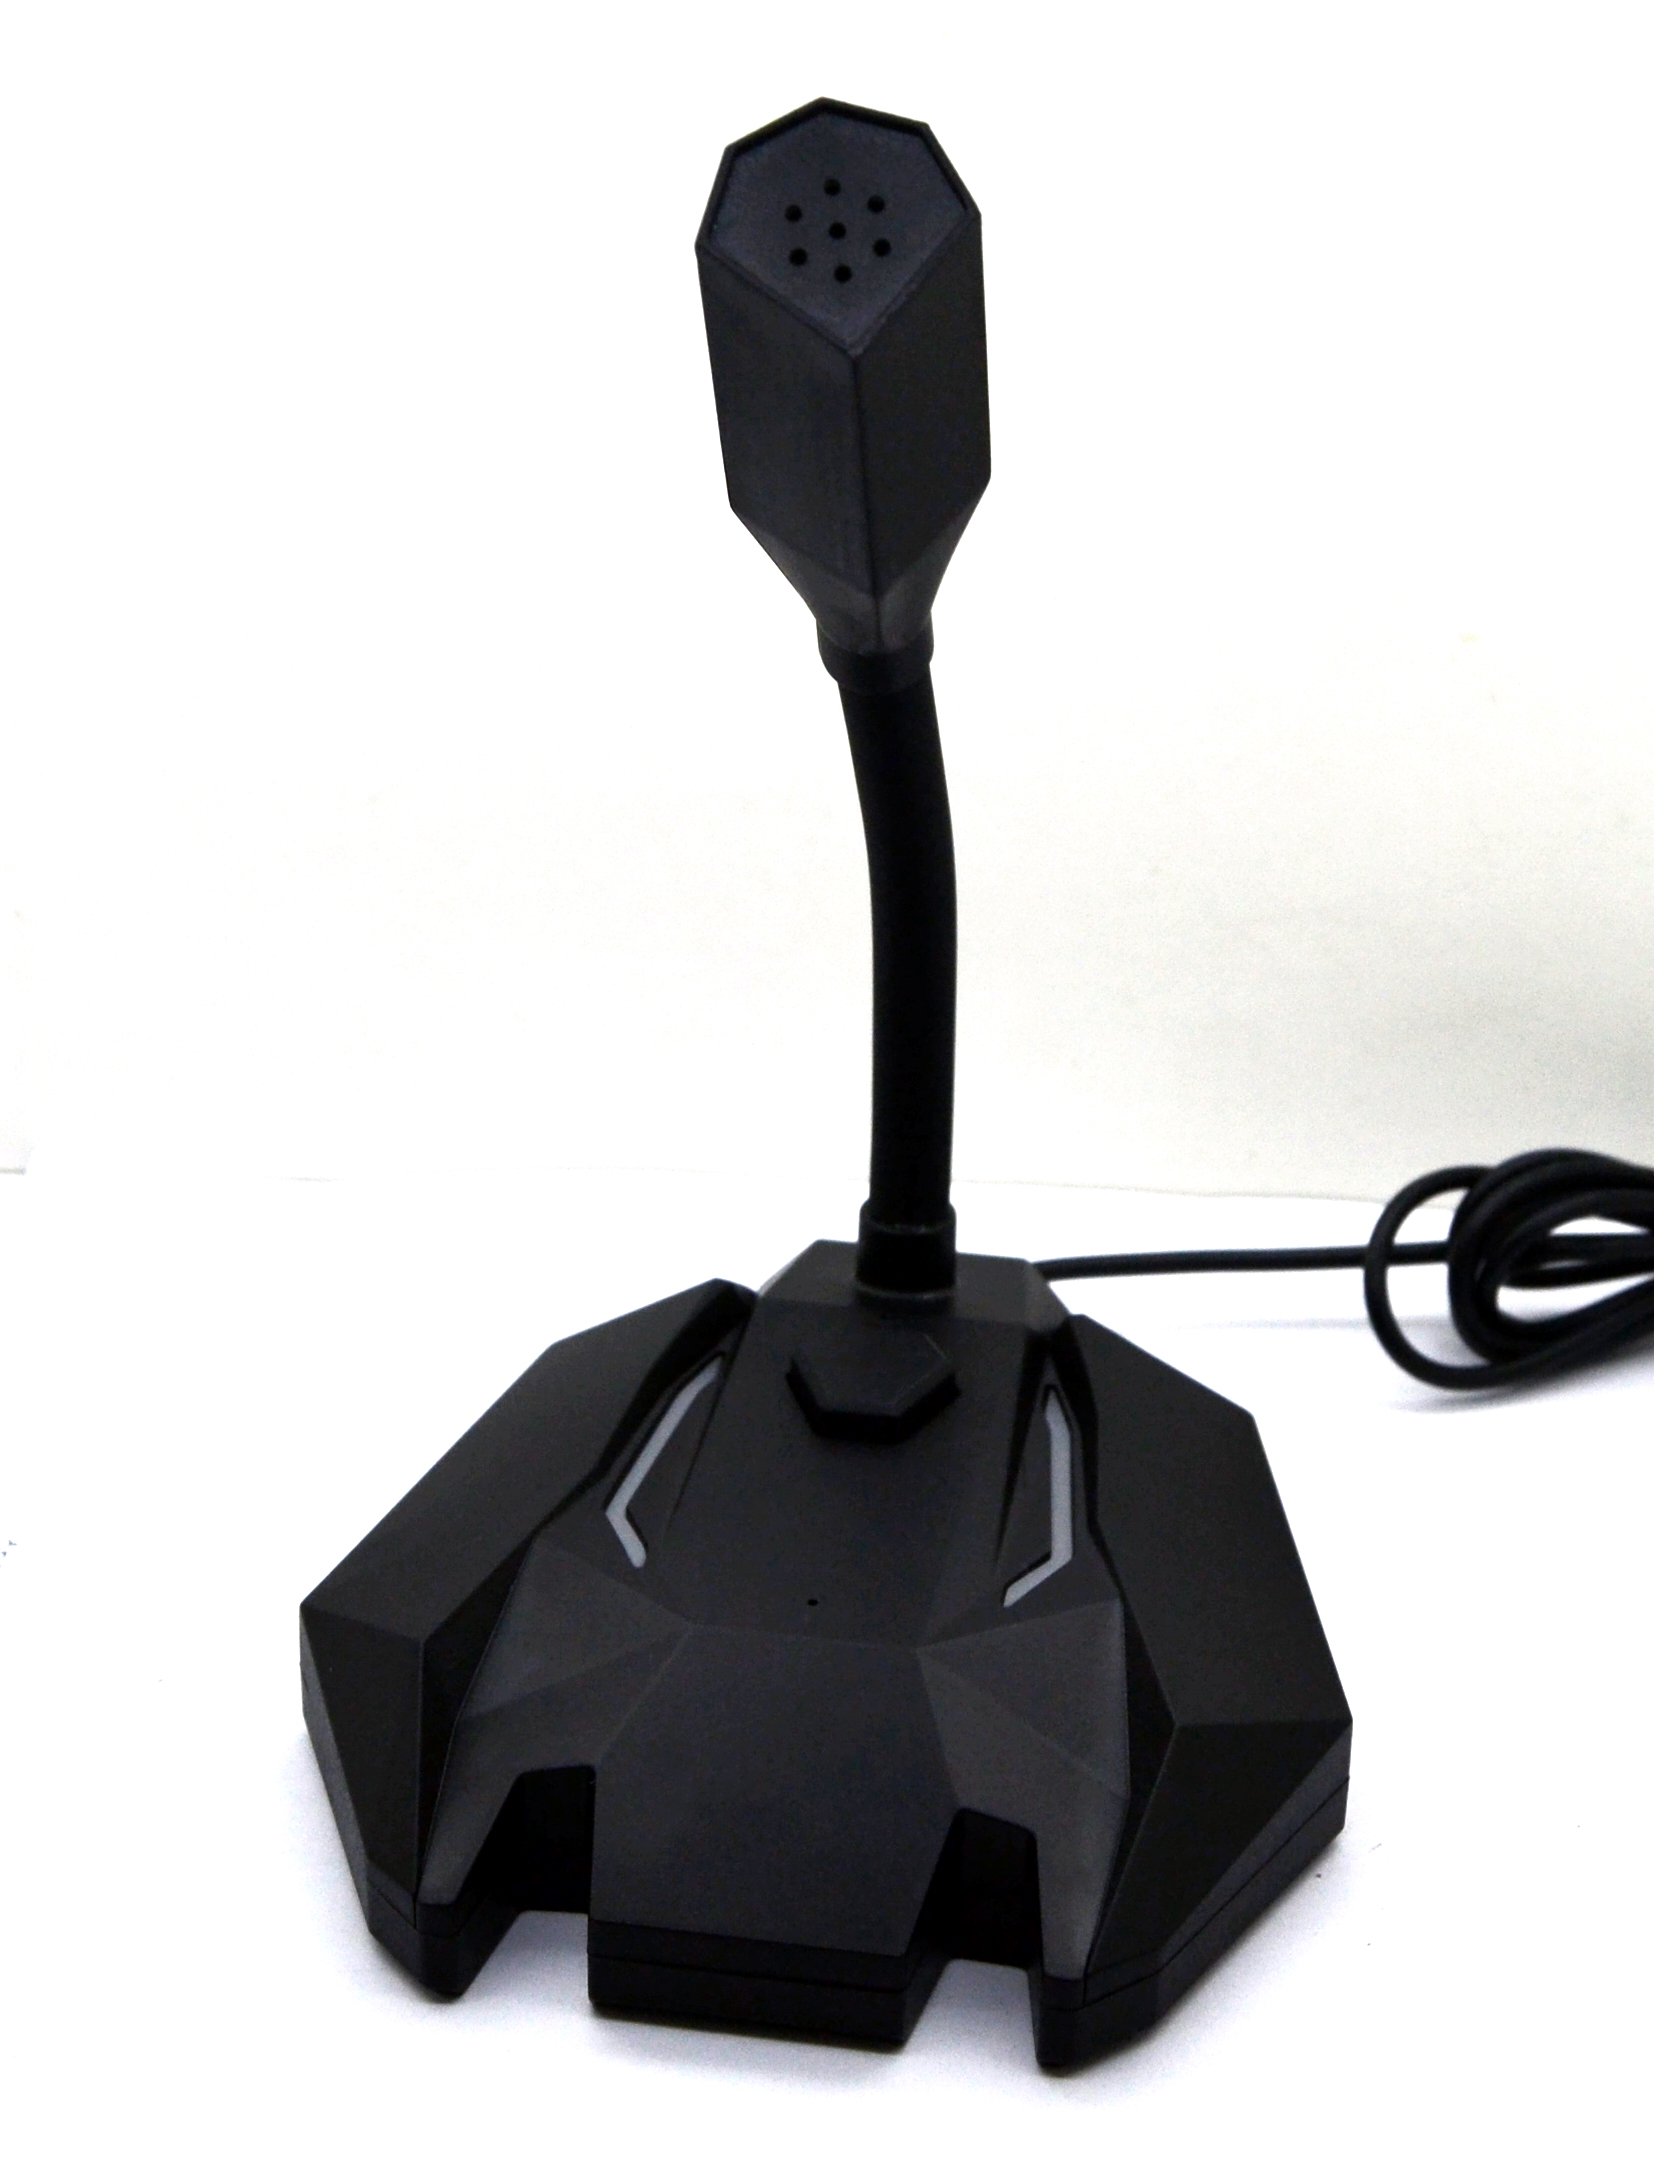 Special computer microphone for lectures